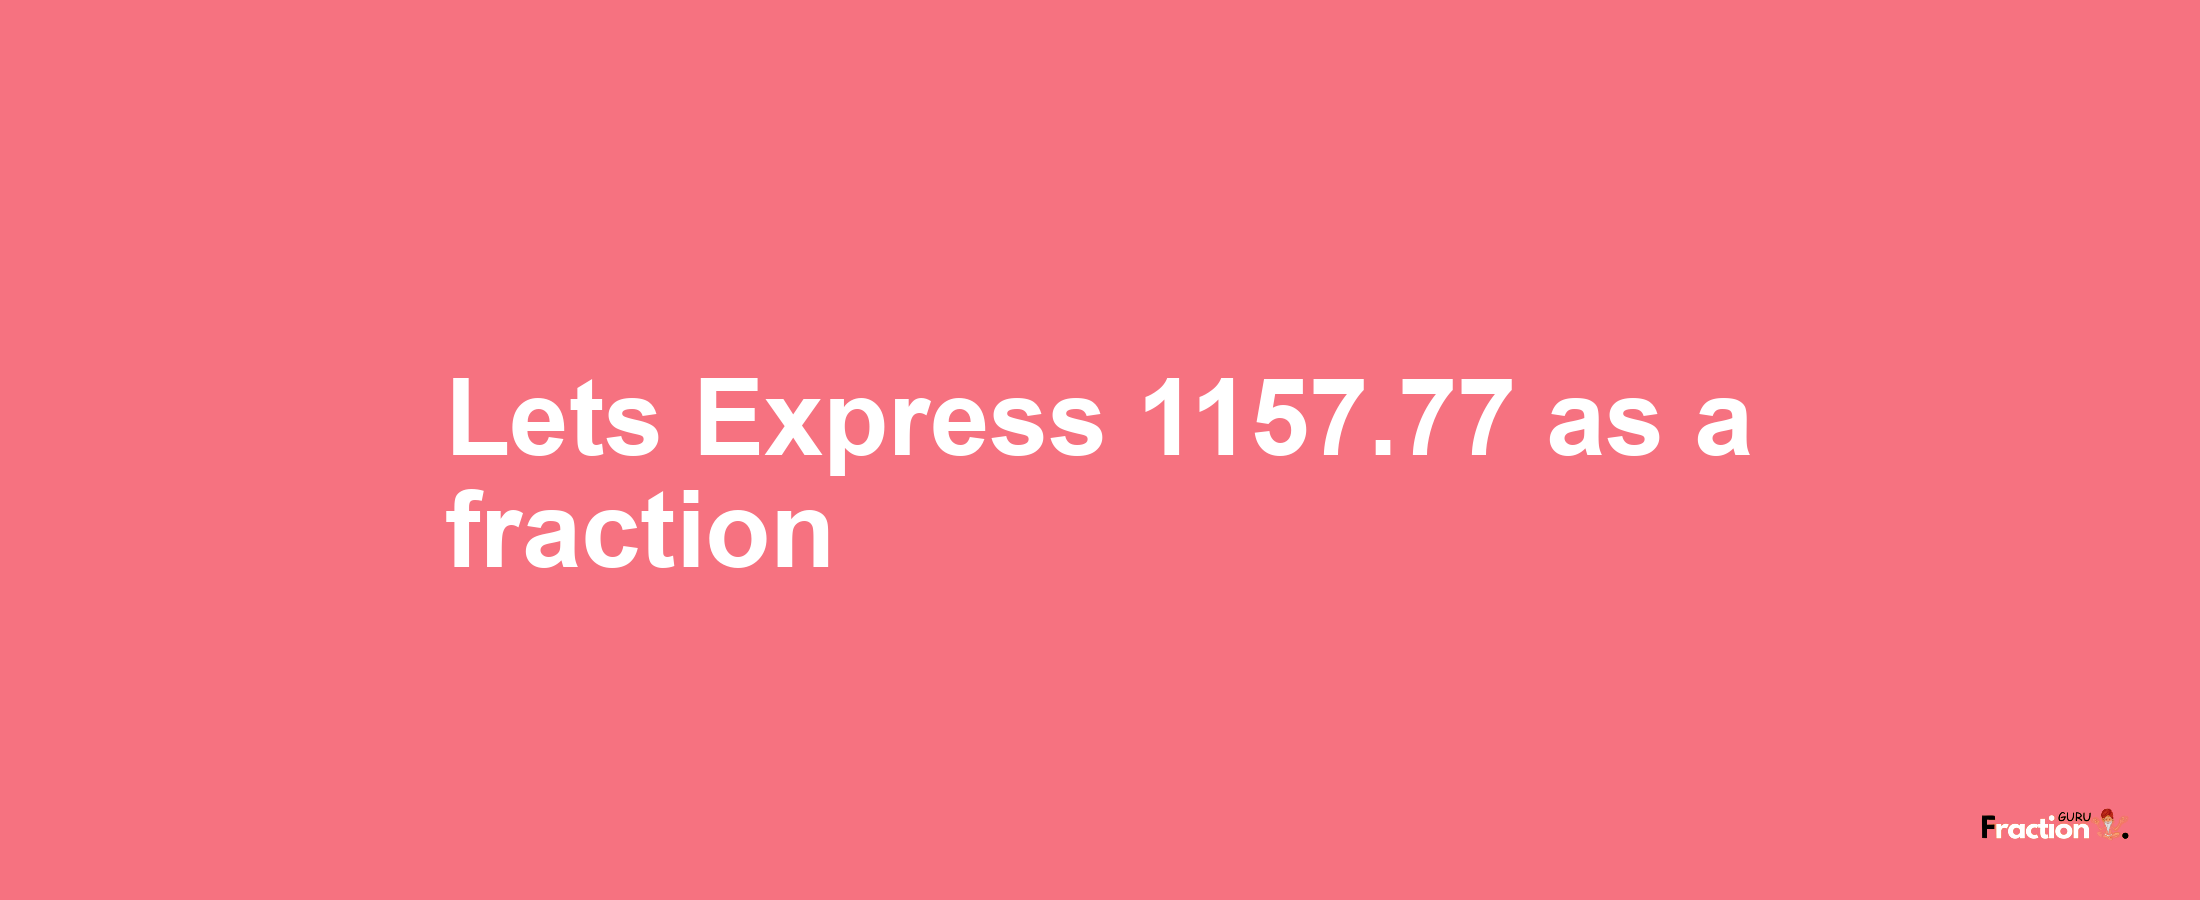 Lets Express 1157.77 as afraction